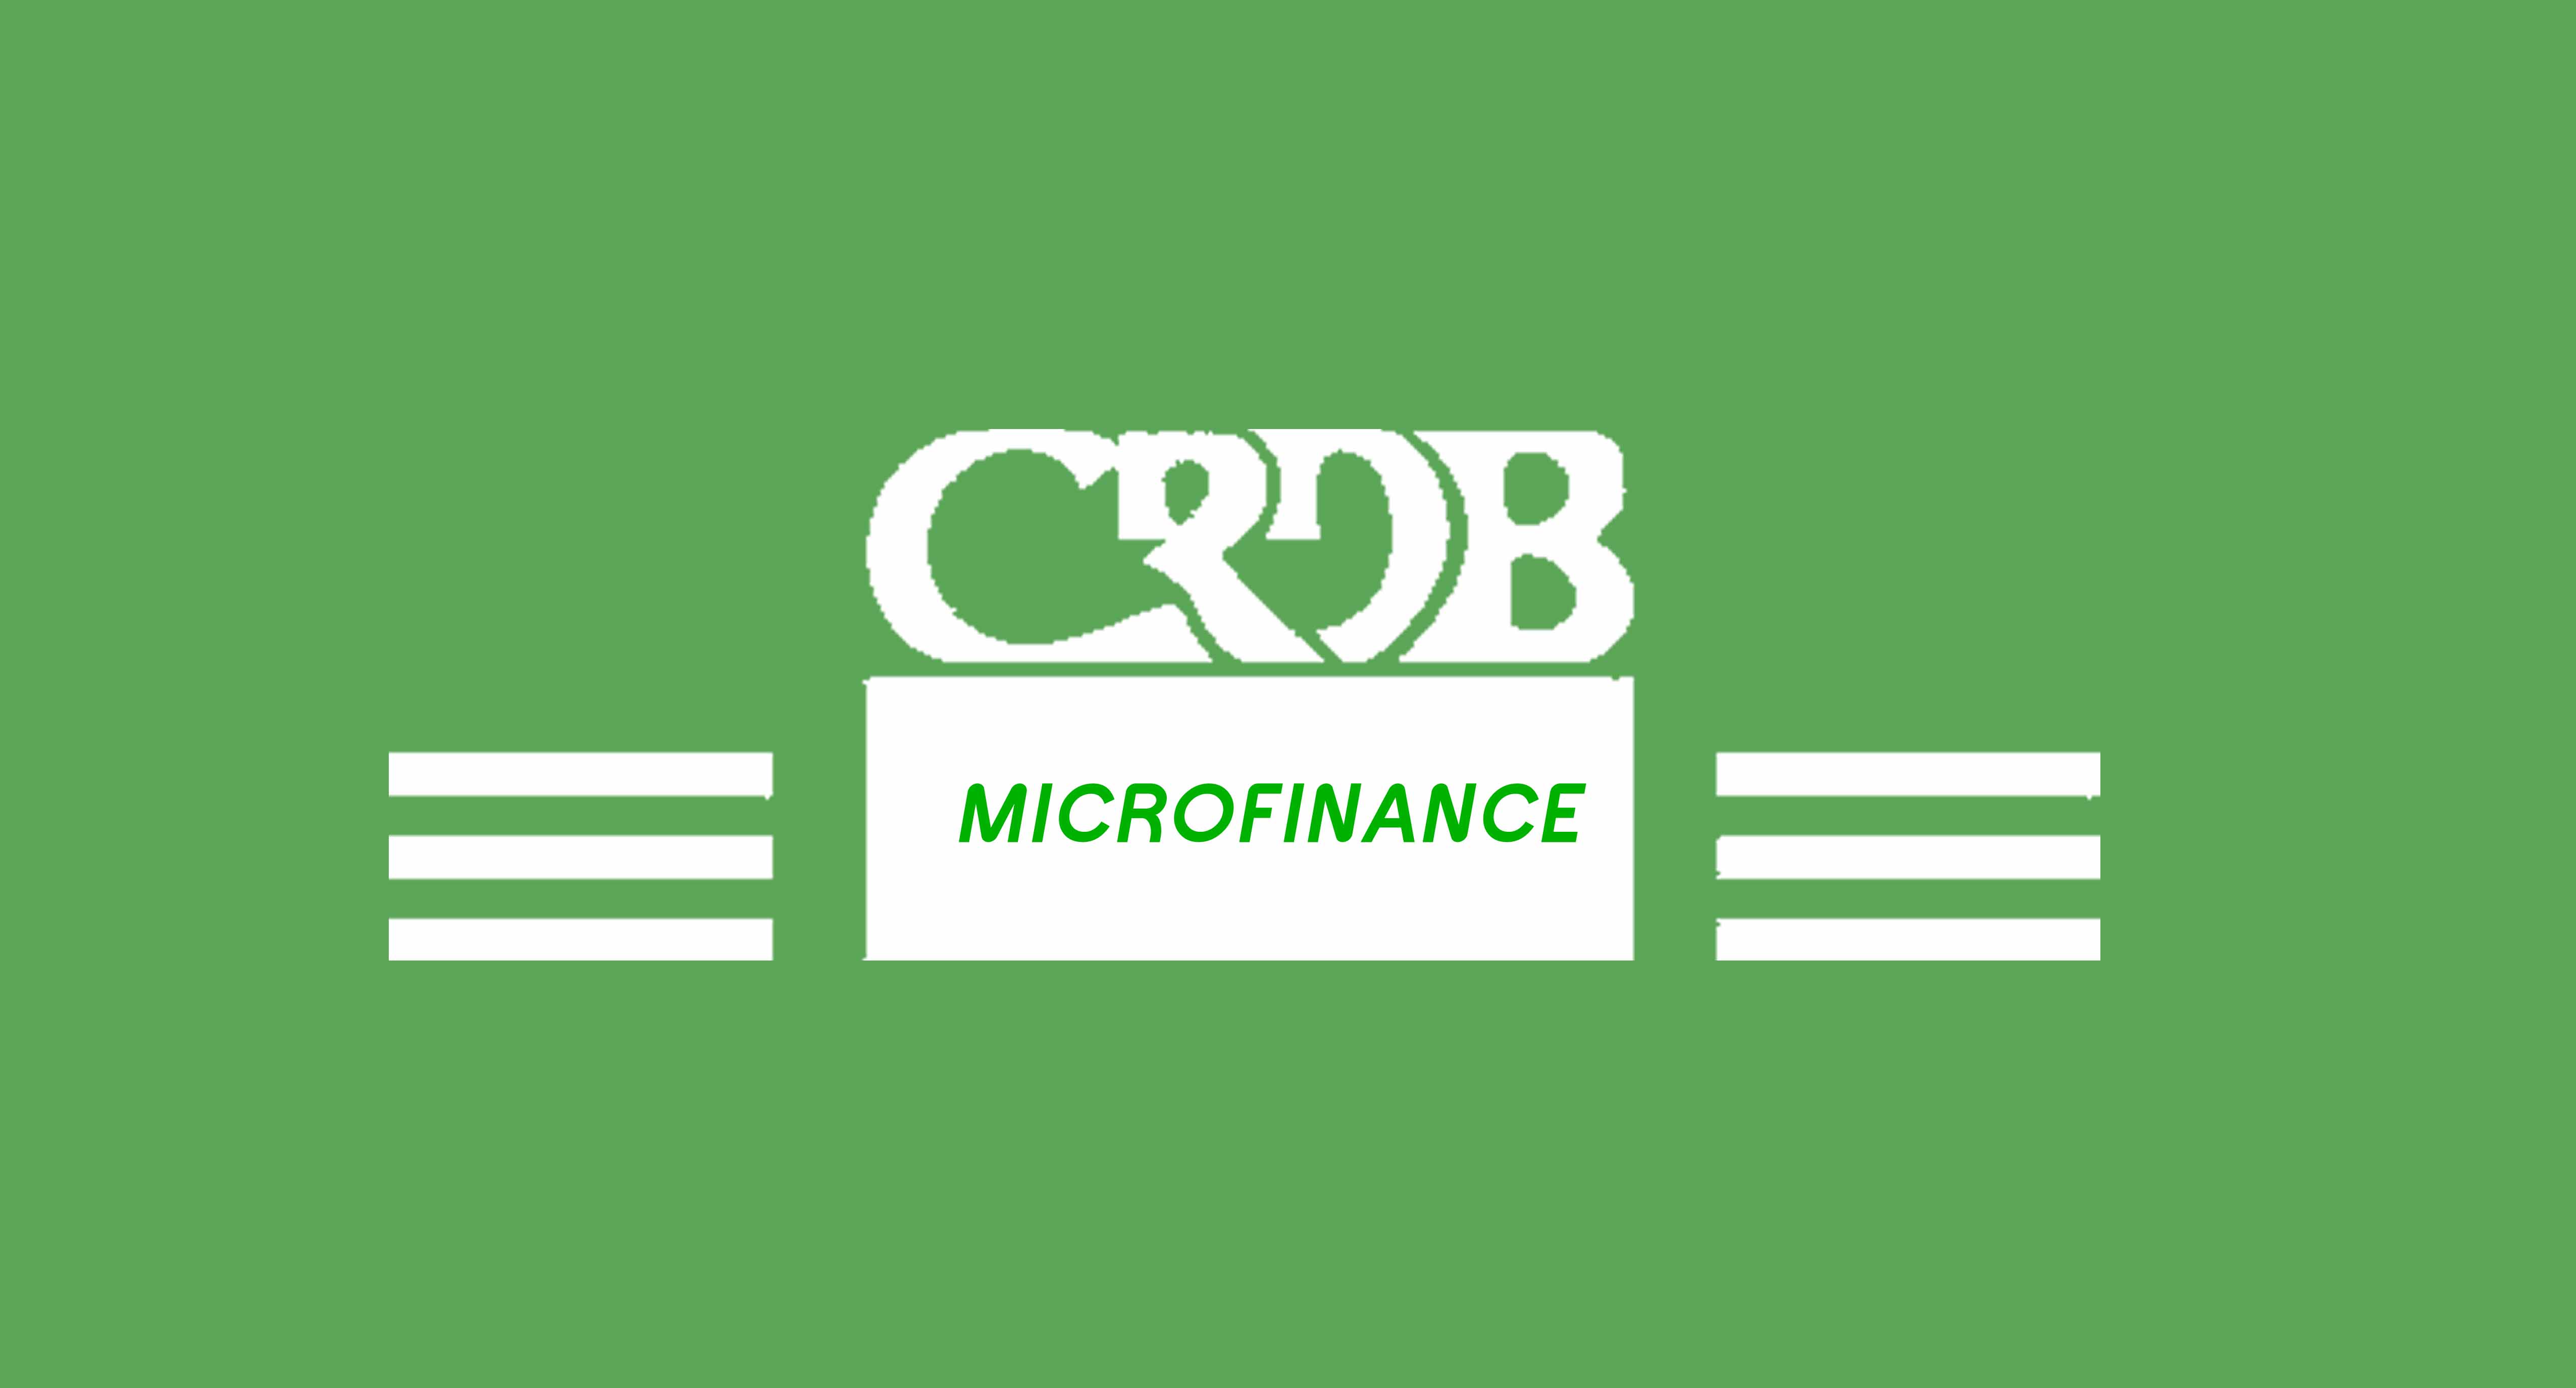 CRDB Logo - victoria finance PLC – We give opportunities to the people